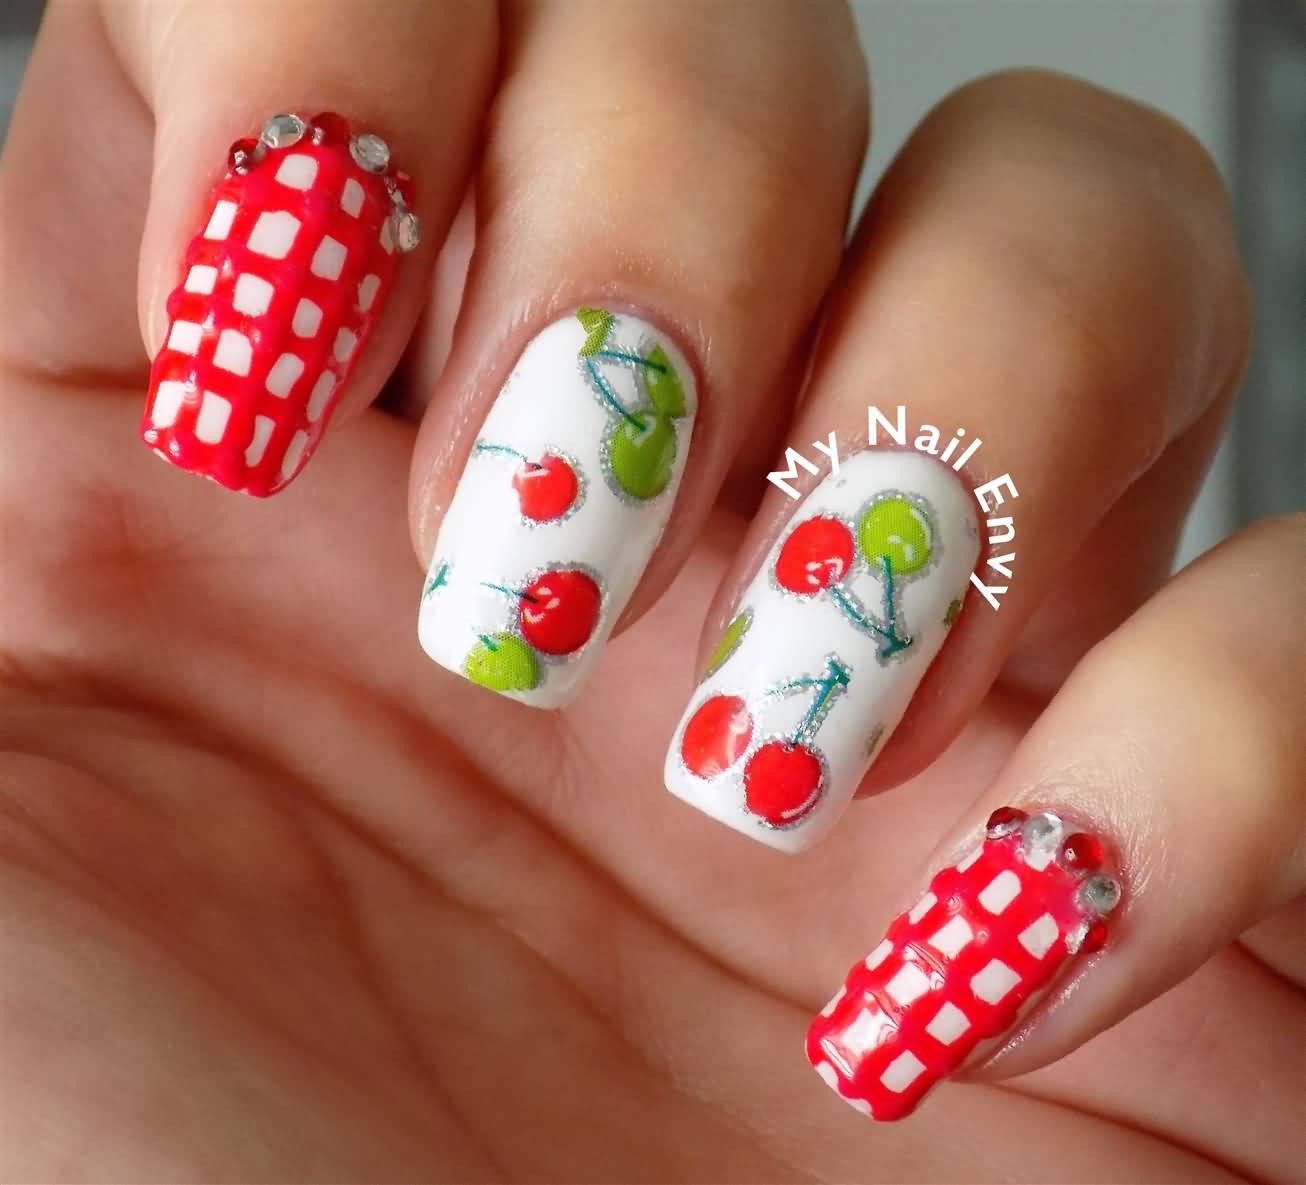 Pink Acrylic Gingham Nail Art With Fruits Design